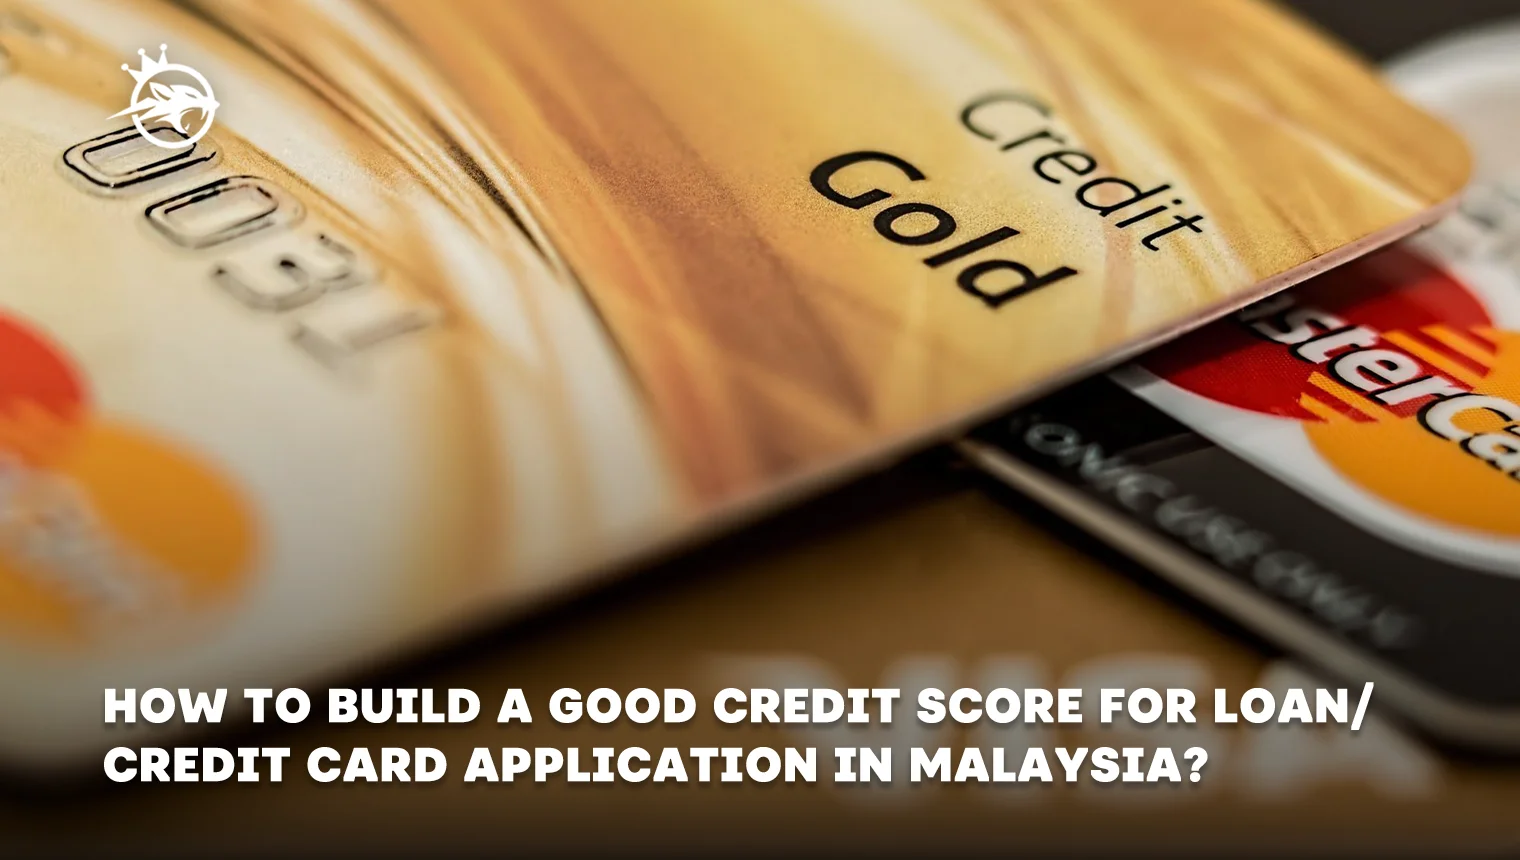 How to Build a Good Credit Score for Loan/ Credit Card Application in Malaysia? 